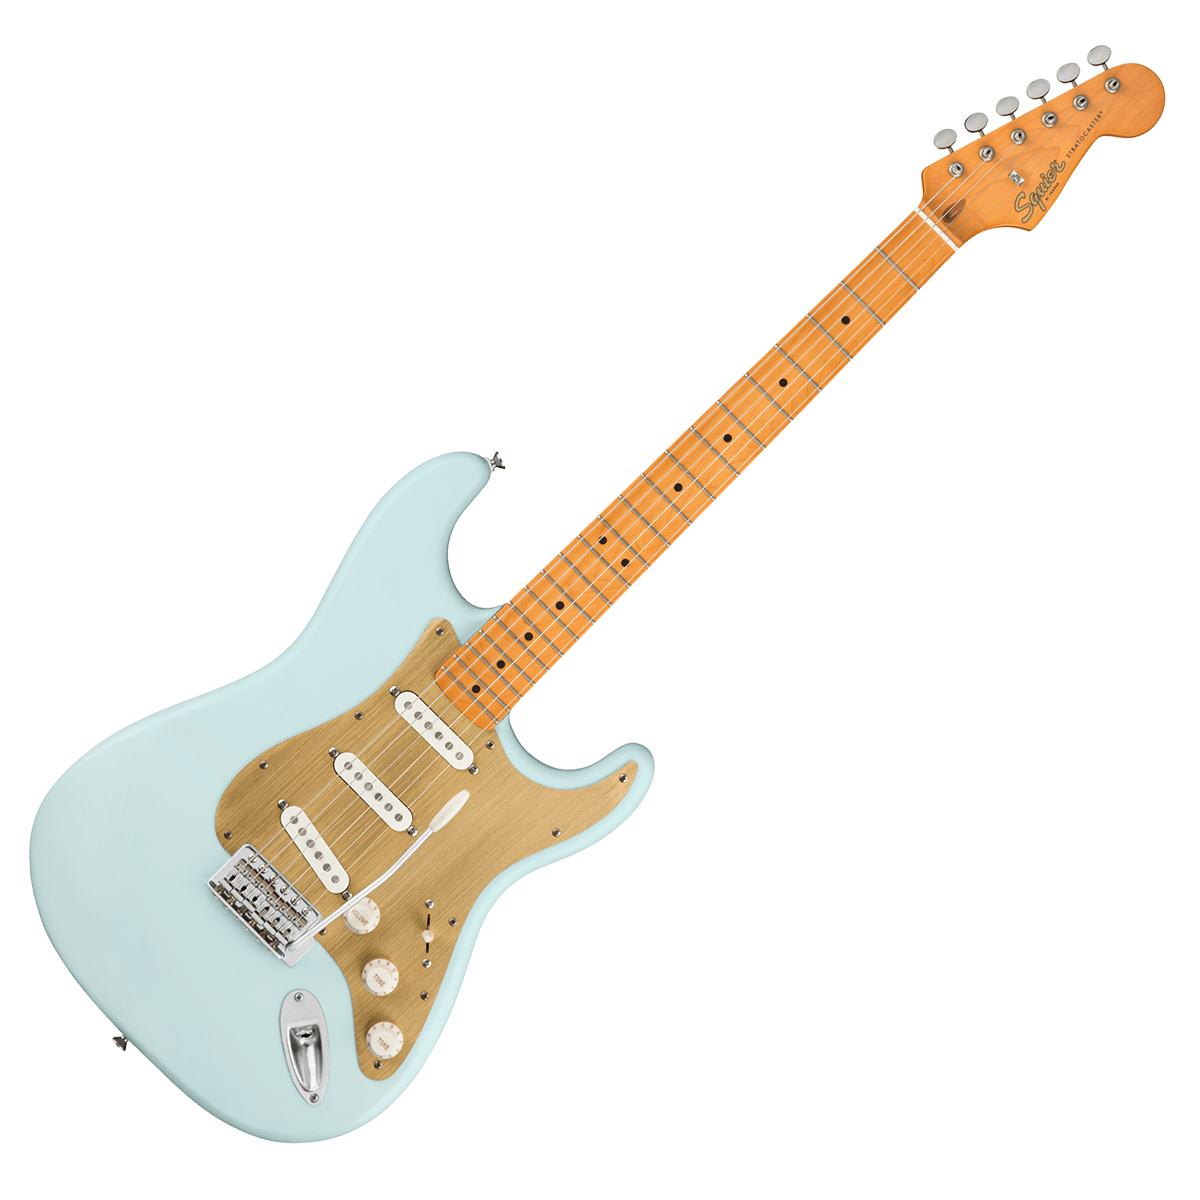 Squier by Fender 40th Anniv. ST SSNB エレキギター初心者セット 